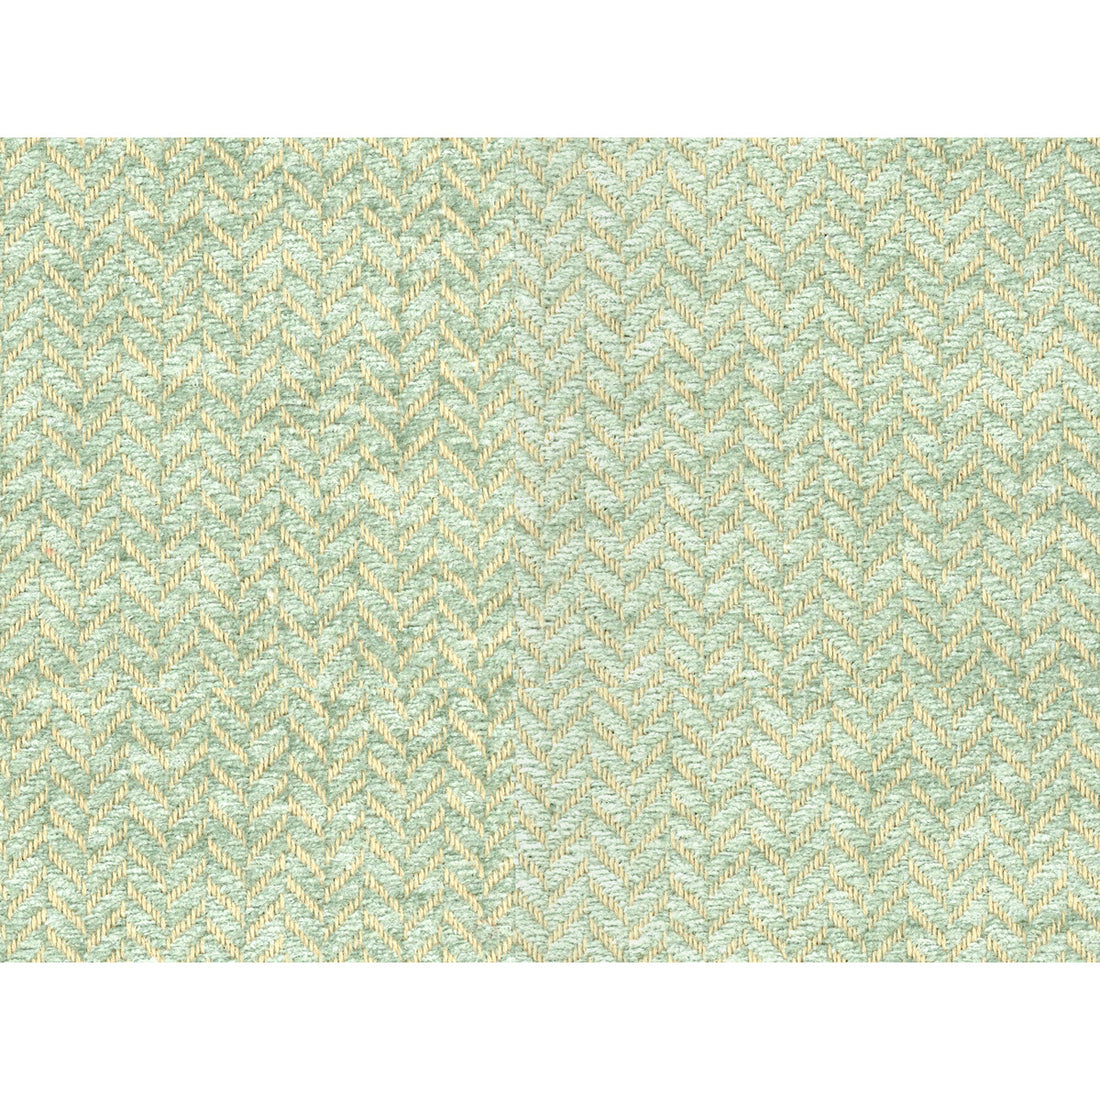 Mottaret Chenille fabric in aqua color - pattern 8016111.13.0 - by Brunschwig &amp; Fils in the Chambery Textures collection